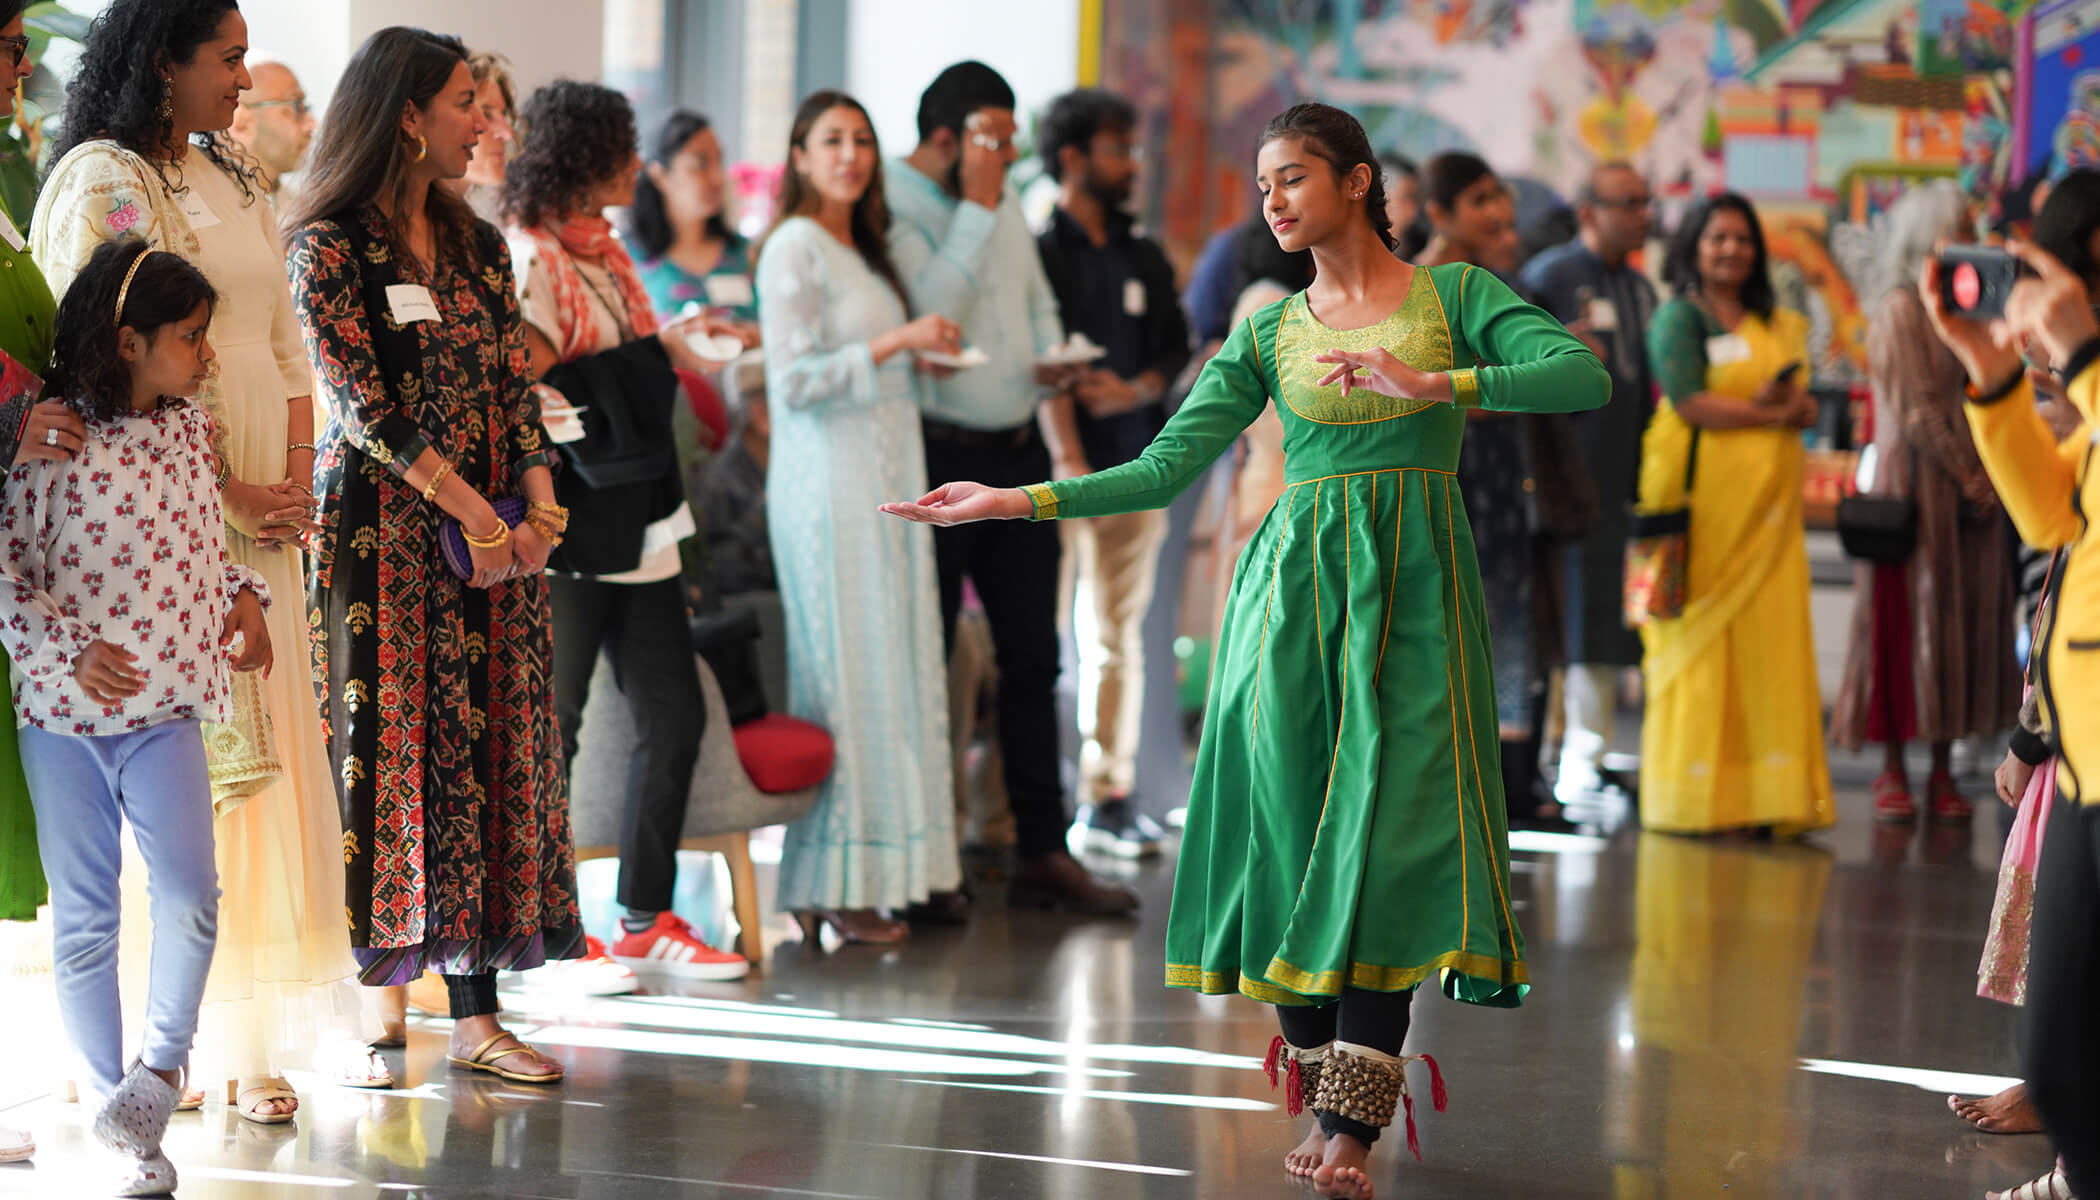 A woman in a green, traditional South Asian dress dances in the middle of a crowd.